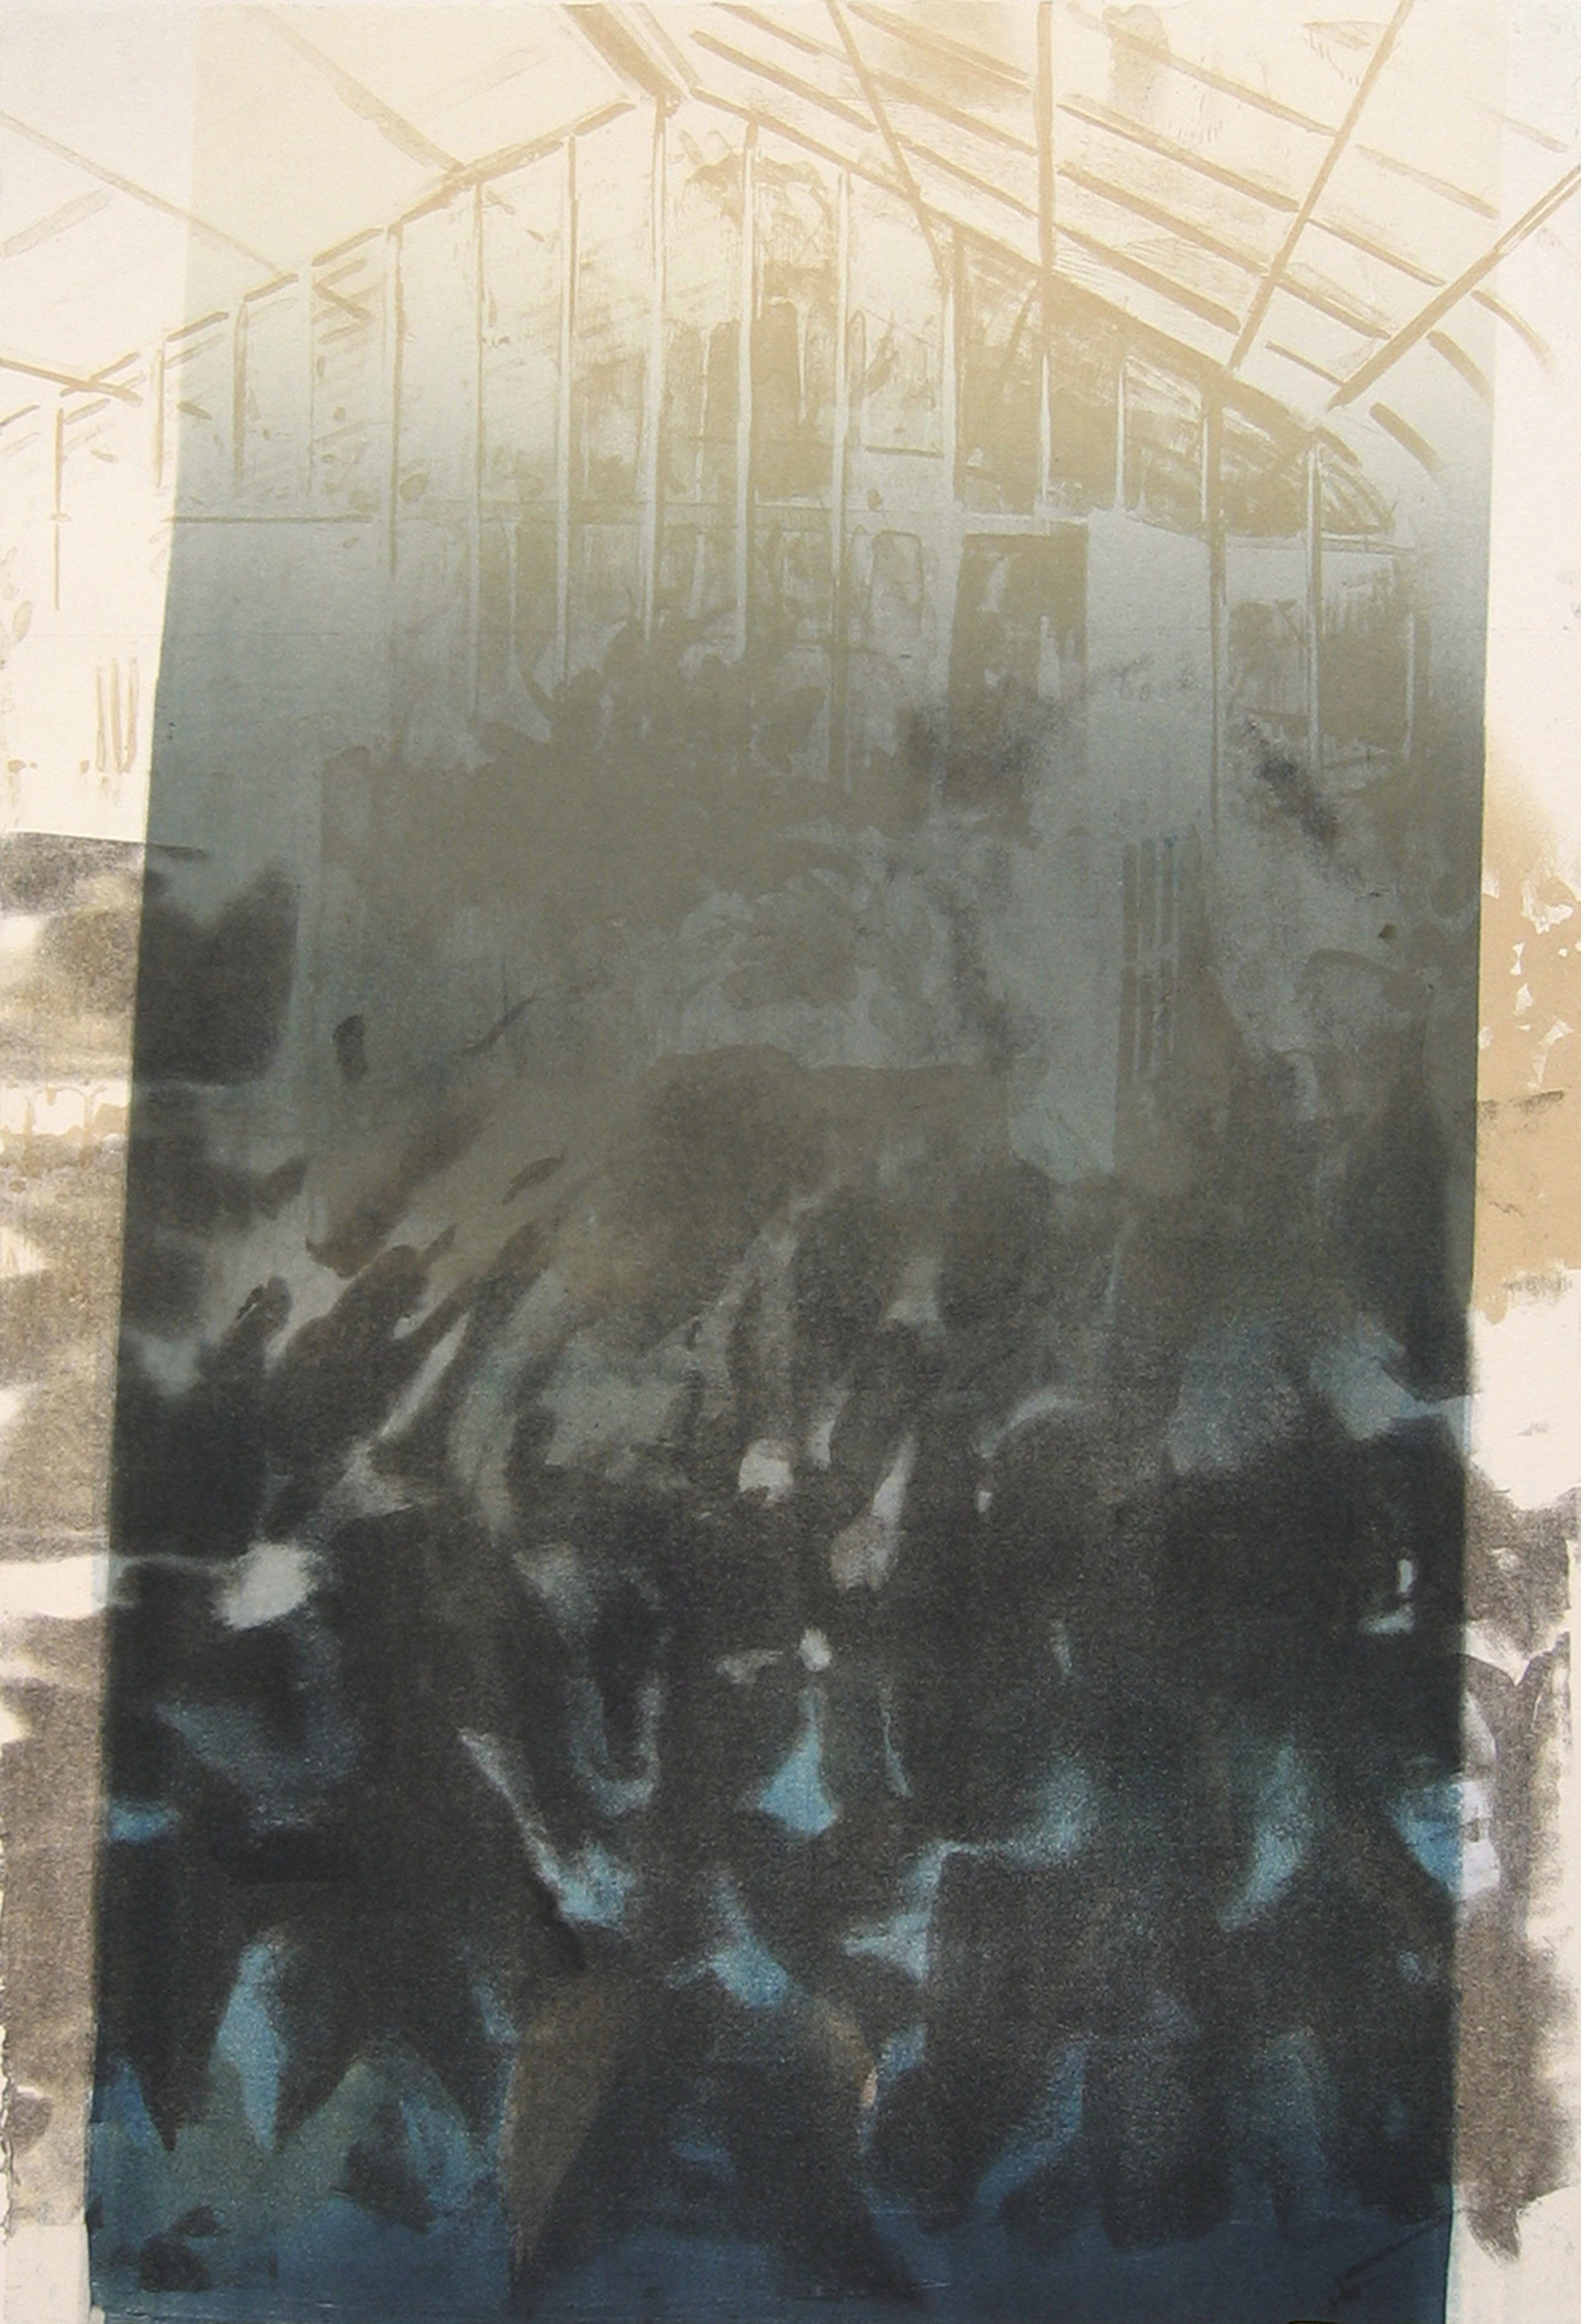    Descent   (sg1) by Joel Janowitz 2005  Lithography and Monoprinting with Okawara chine collé on Arches Cover | image: 38" x 25 1/2" | paper: 41 1/2" x 28"&nbsp; 